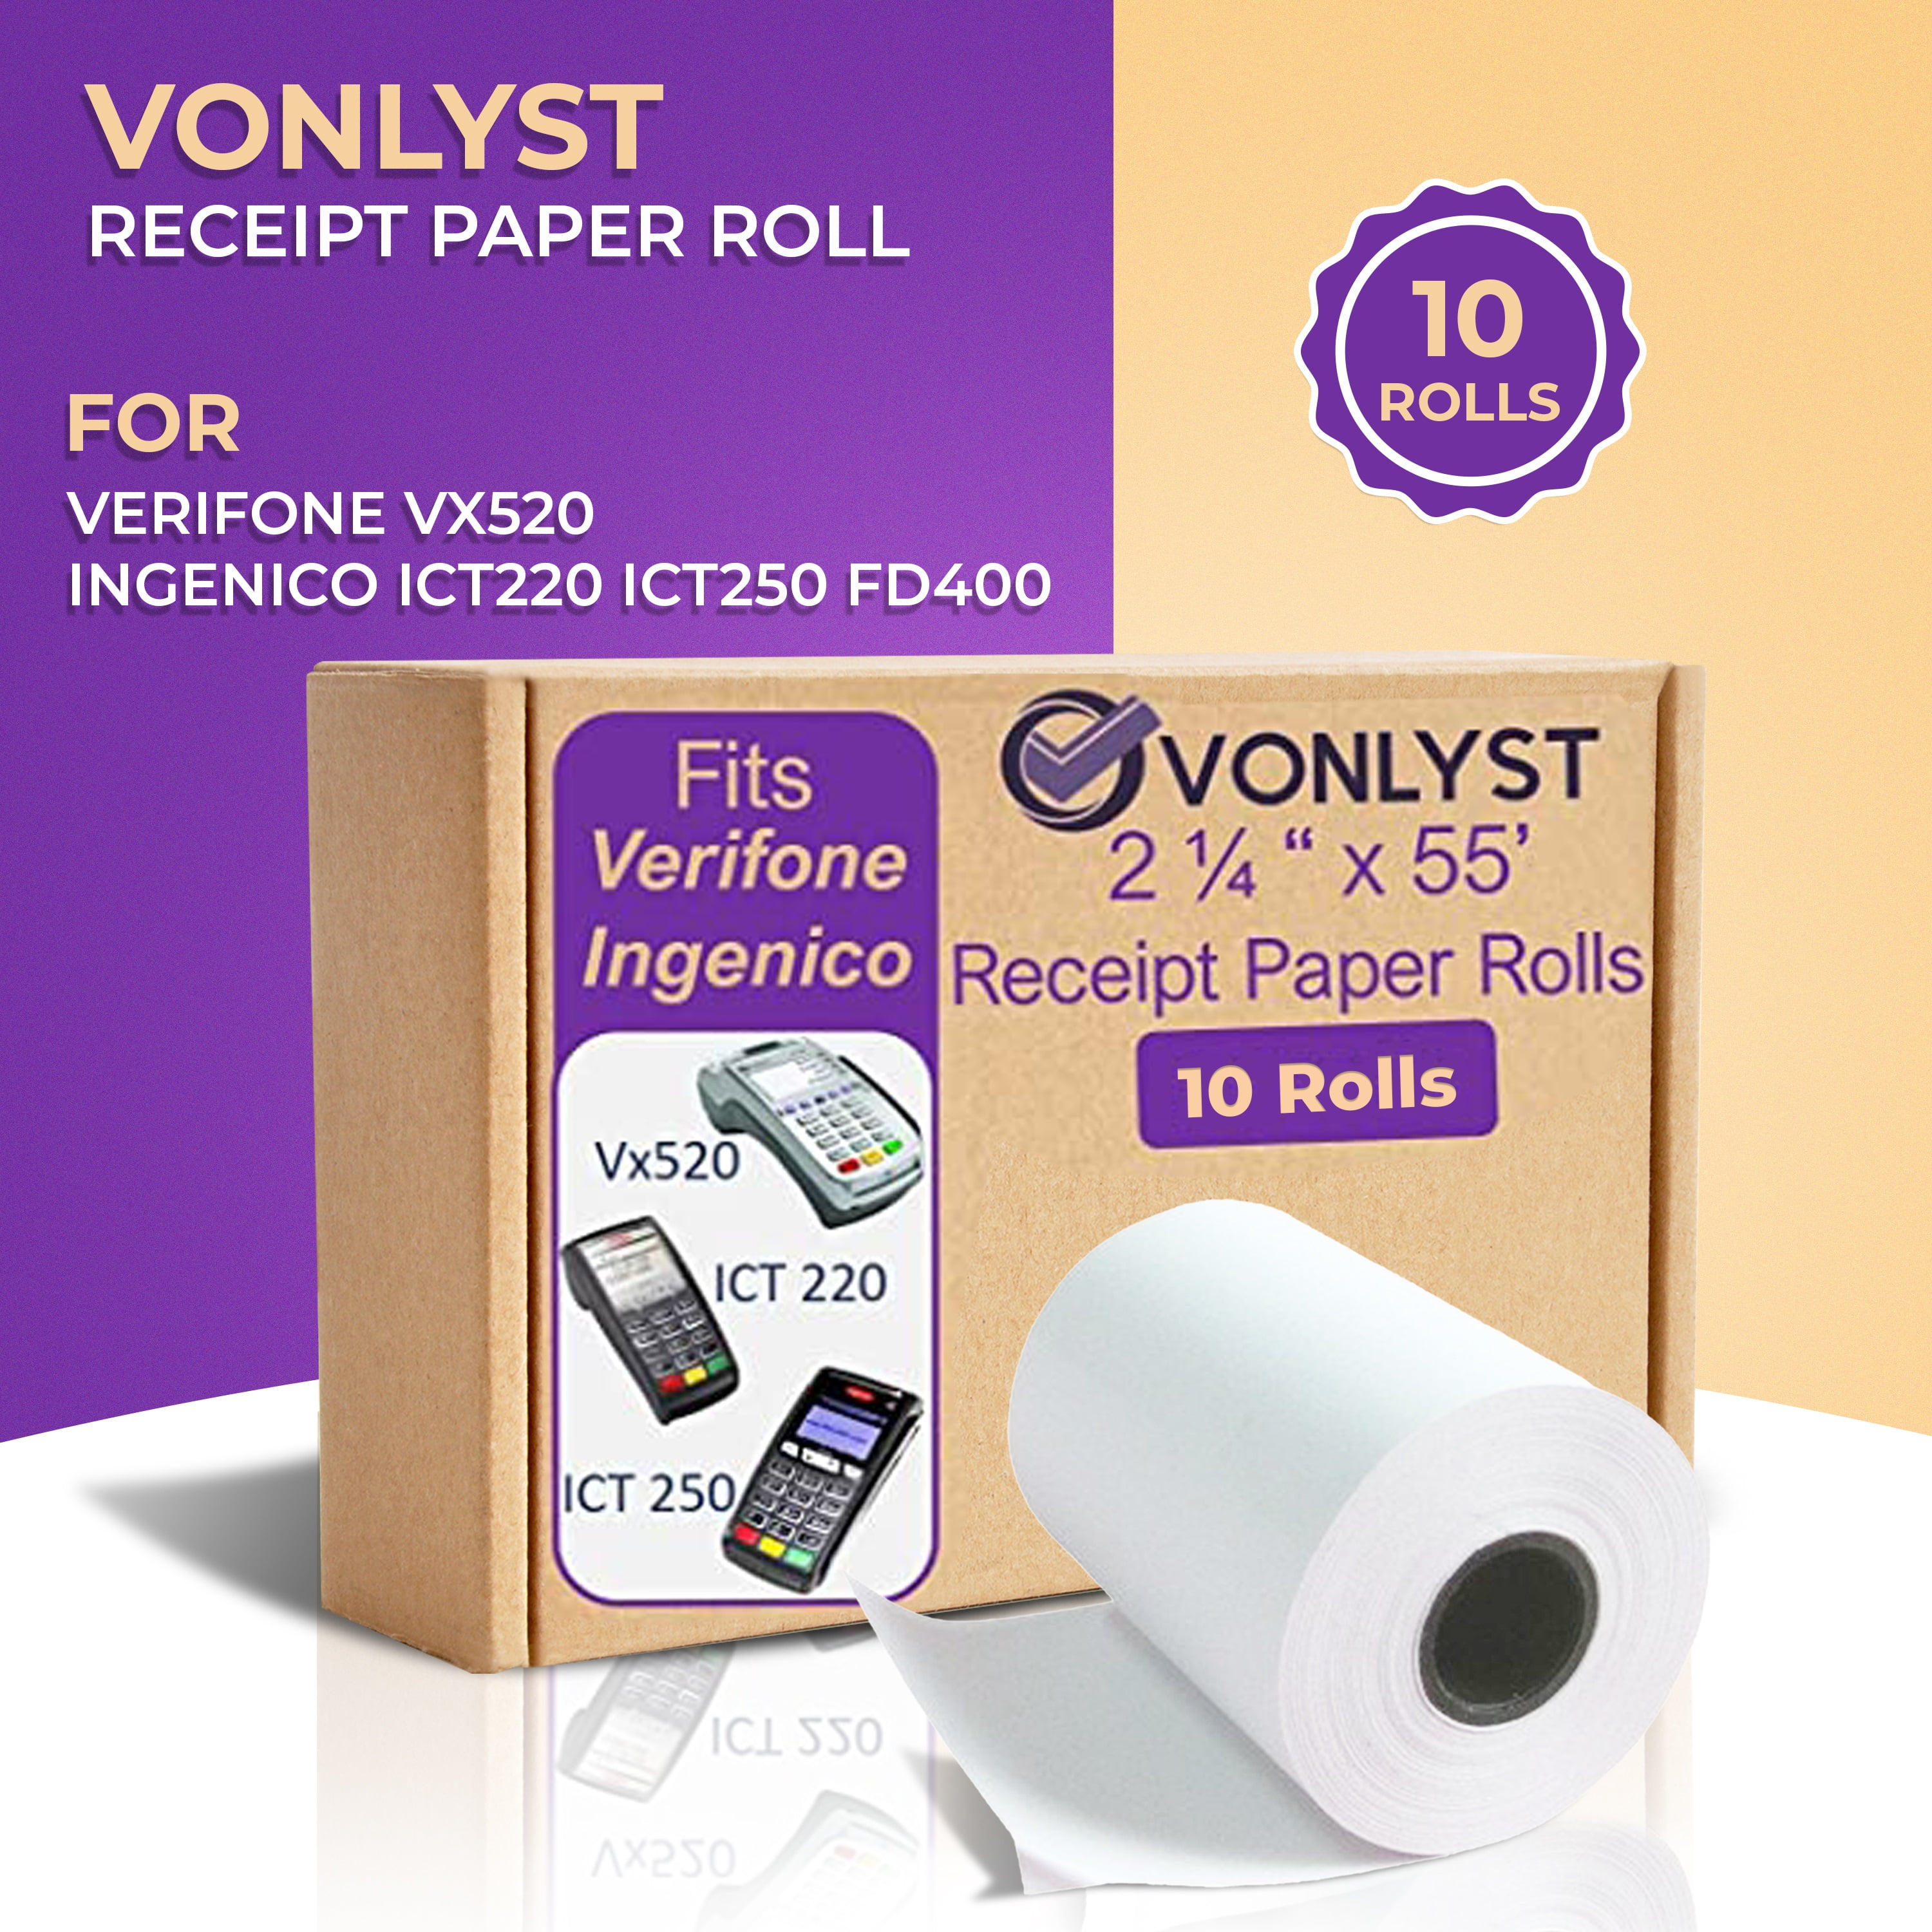 250 ROLLS *FREE SHIPPING* THERMAL RECEIPT PAPER VERIFONE vx520 2-1/4" x 50' 